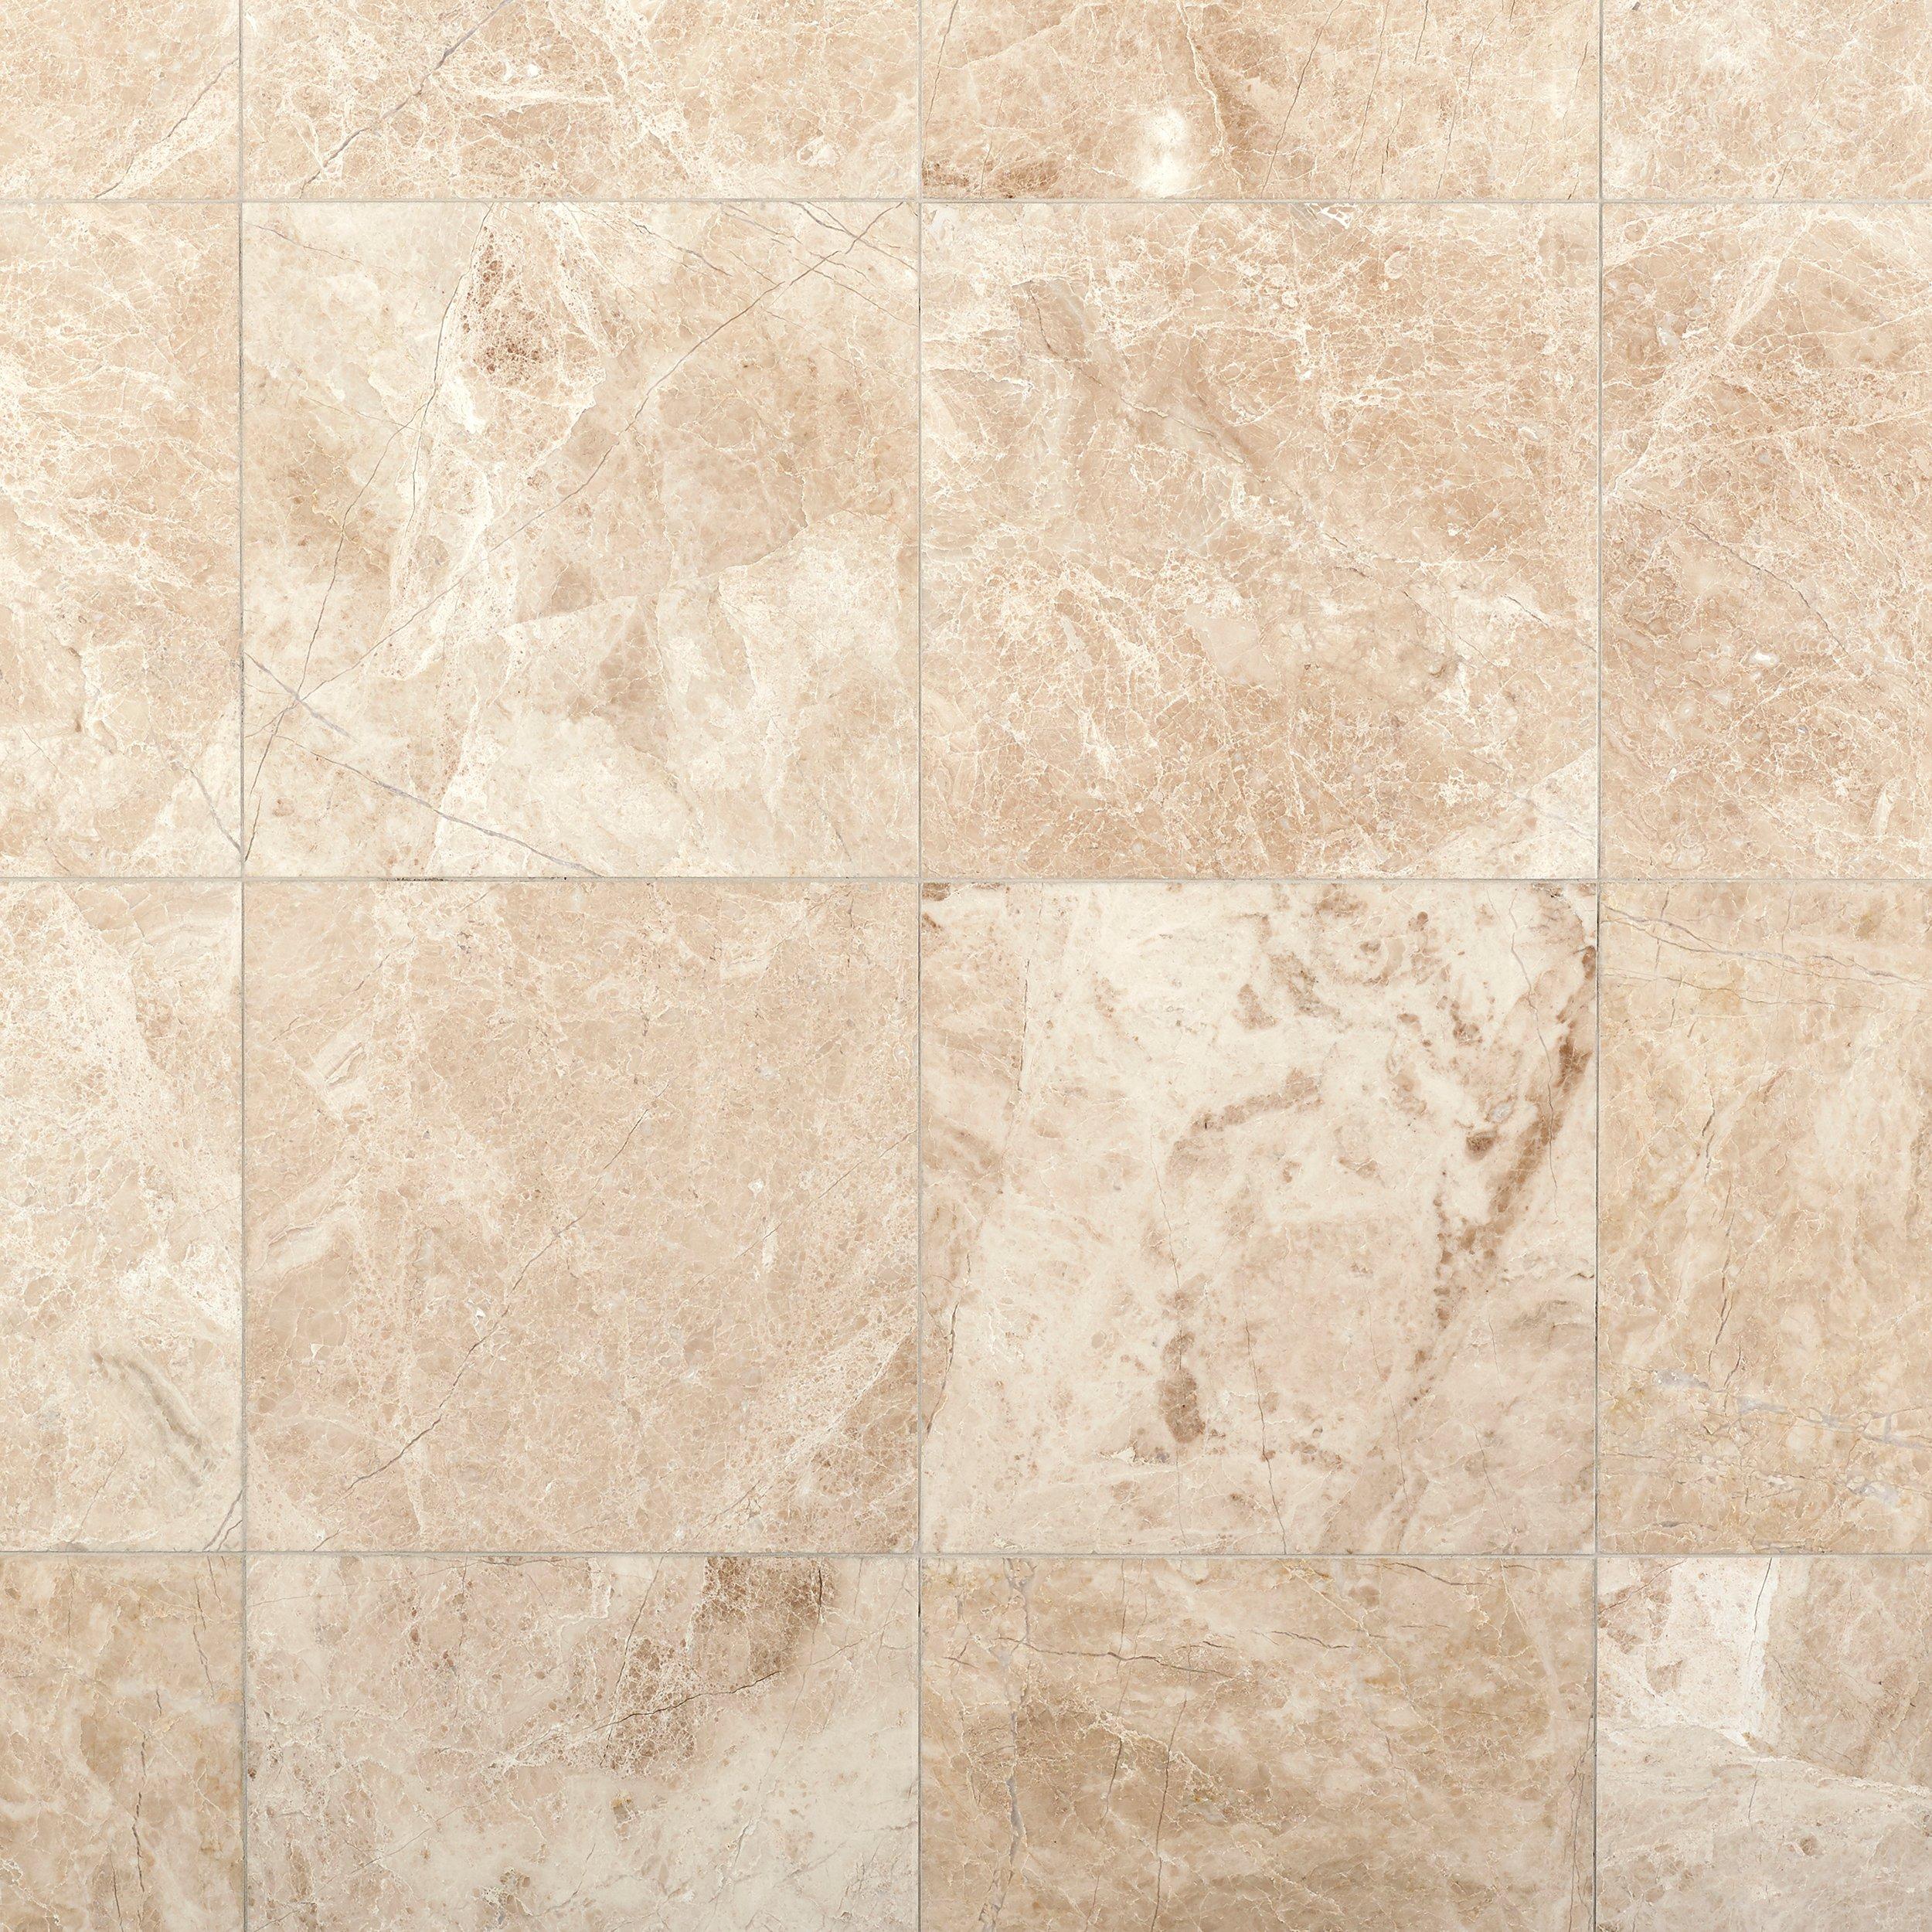 LUXURIOUS CAPPUCCINO POLISHED MARBLE TILE TILES 406x406 X12mm  £49.99 Per m2 